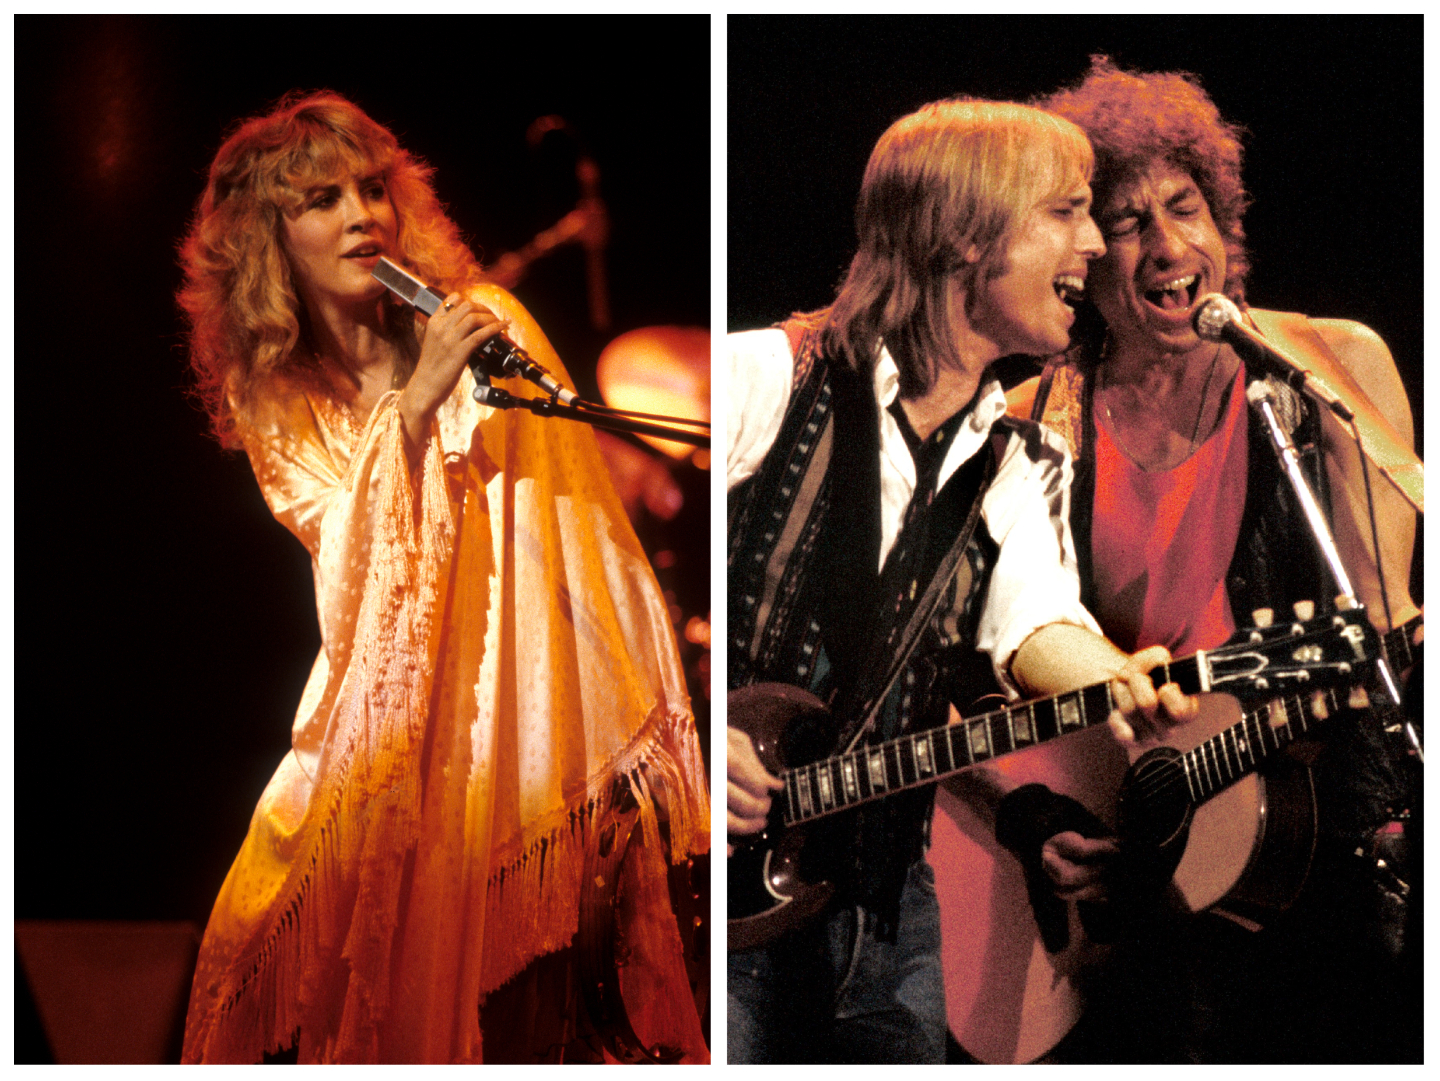 Stevie Nicks wears a shawl and sings into a microphone. Tom Petty and Bob Dylan play guitar and sing into the same microphone. 